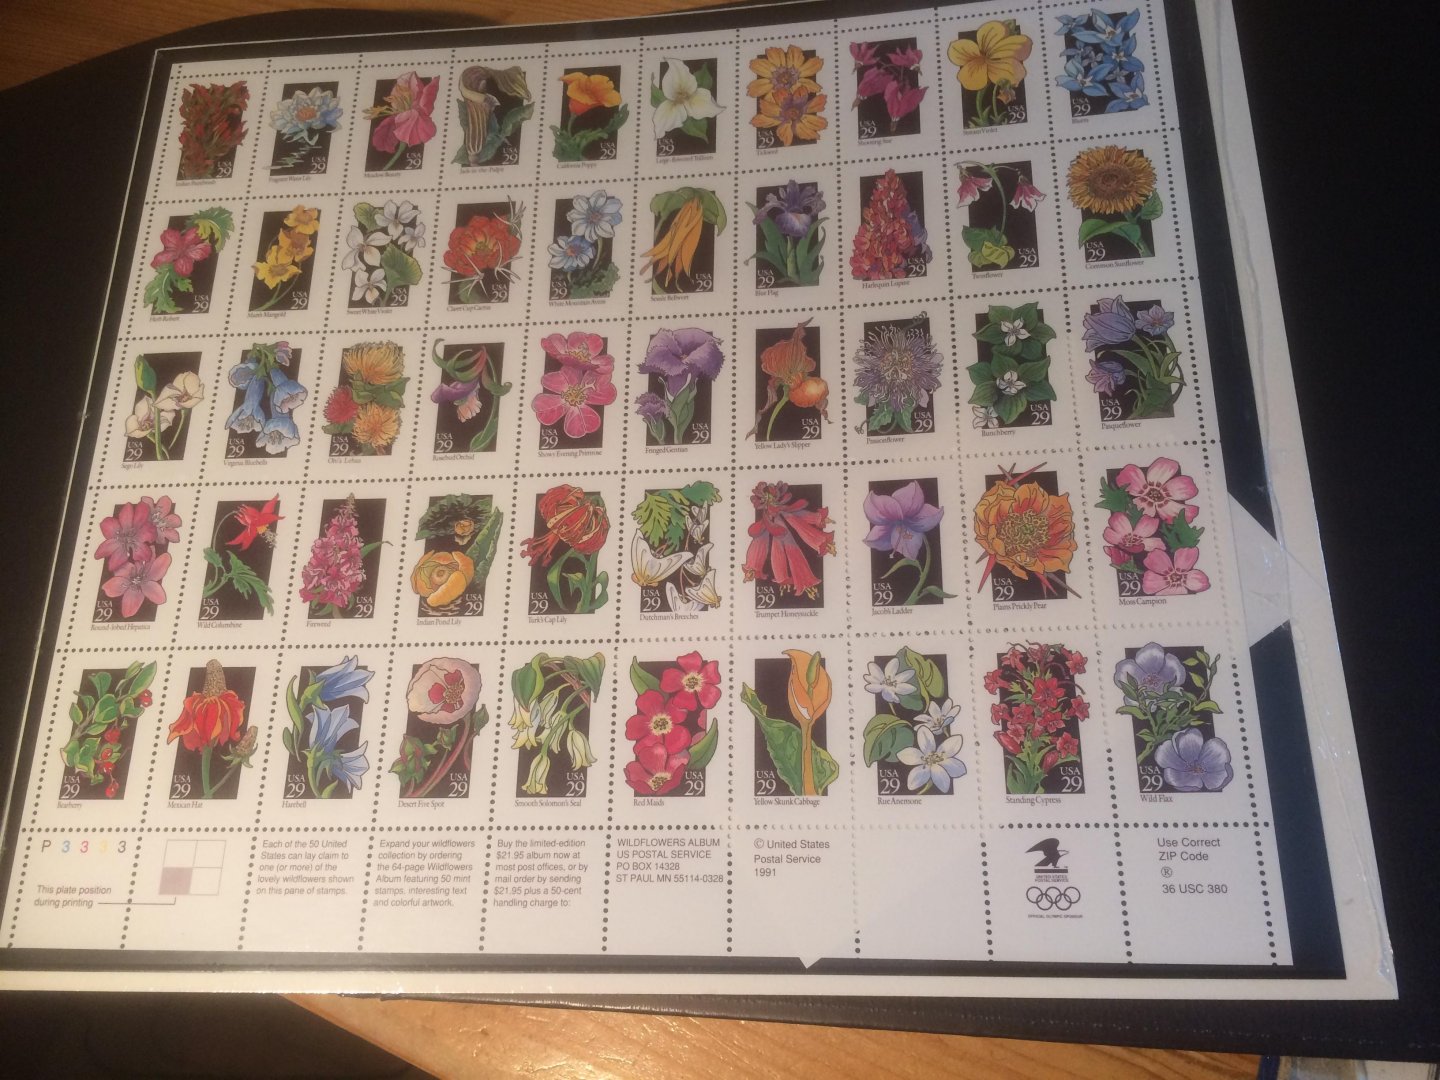 Day, Sarah & US Postal Service - Wildflowers - A Collection of US Commemorative Stamps